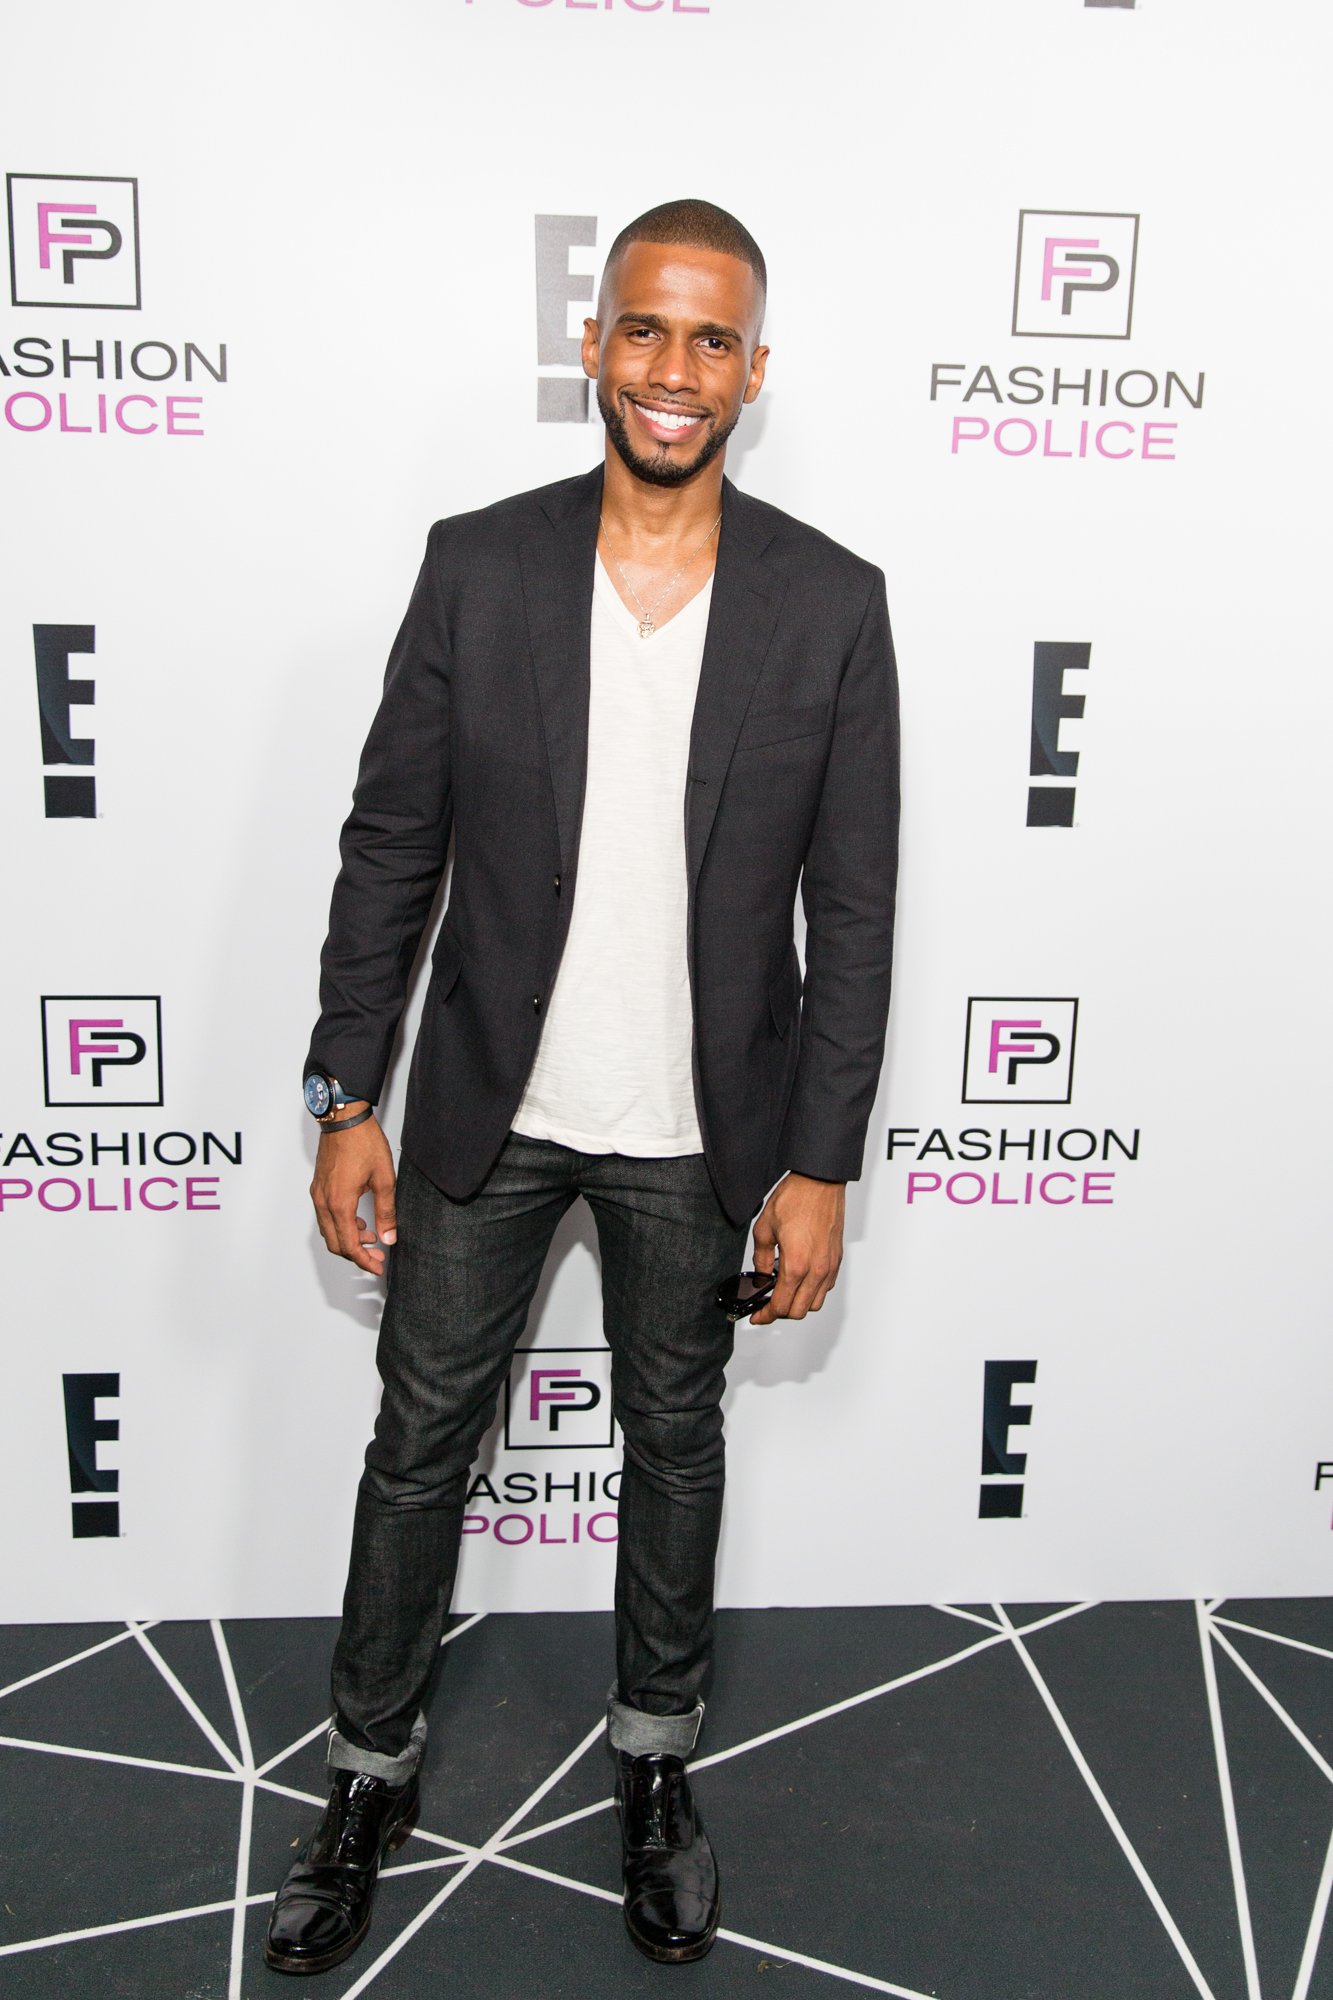 Actor Eric West attends E!'s 2016 Spring NYFW Fashion Police Kick Off Party at The Standard, High Line, Biergarten & Garden on September 9, 2015 in New York City.